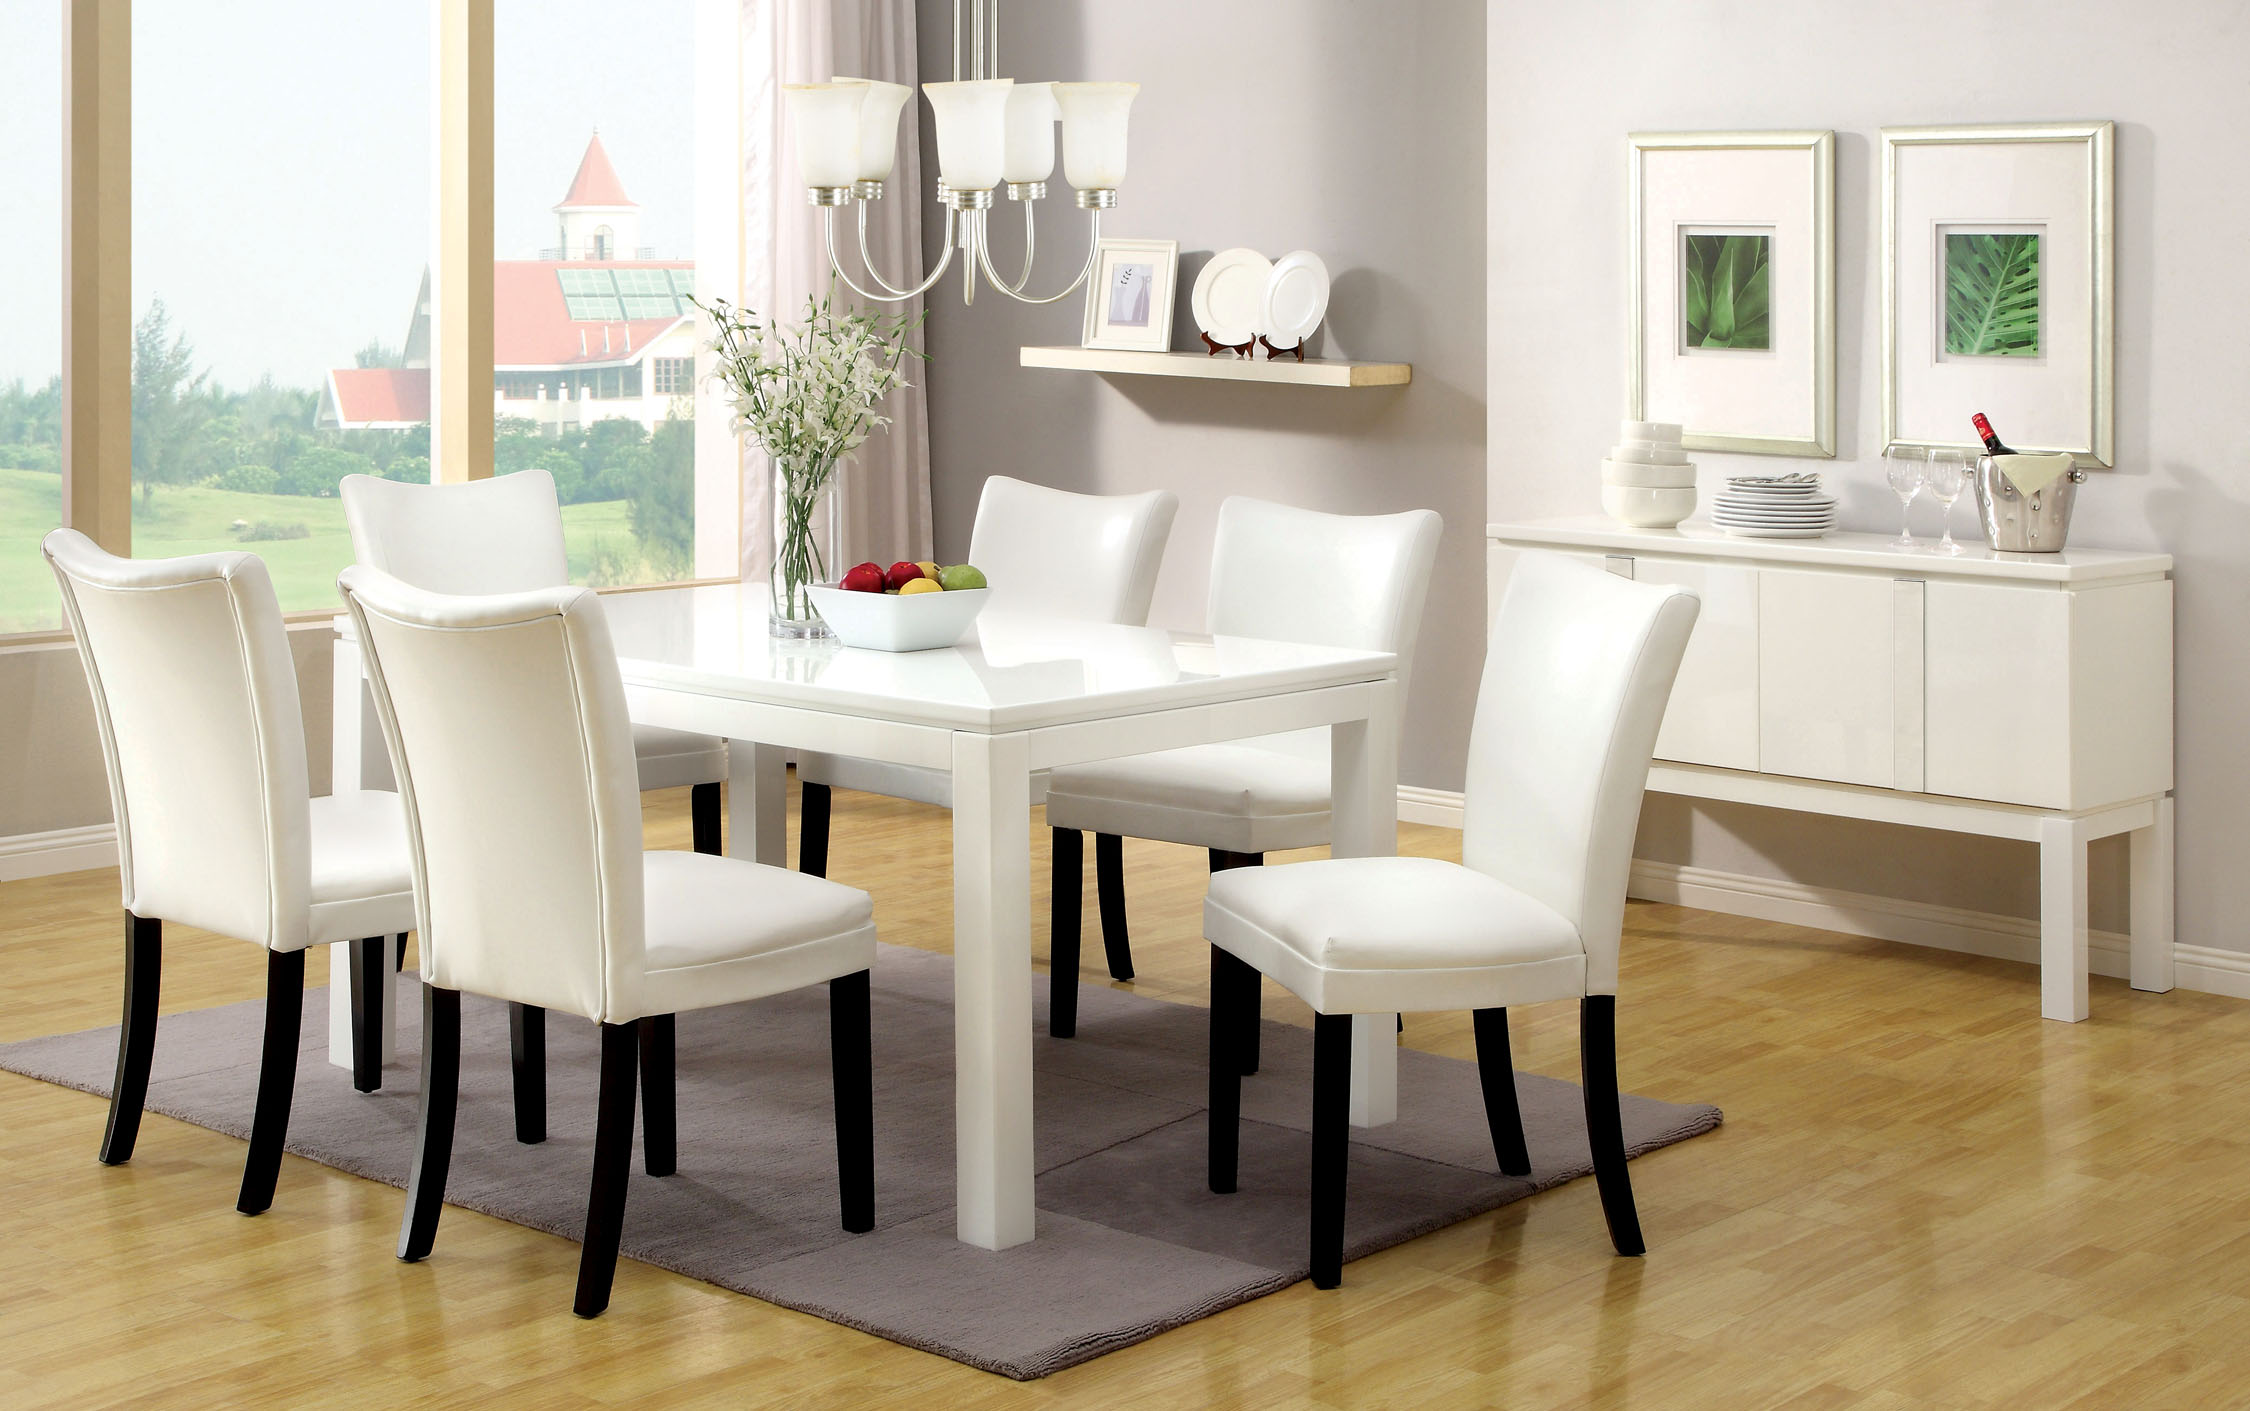 Furniture of America Grangas White Gloss Dining Table